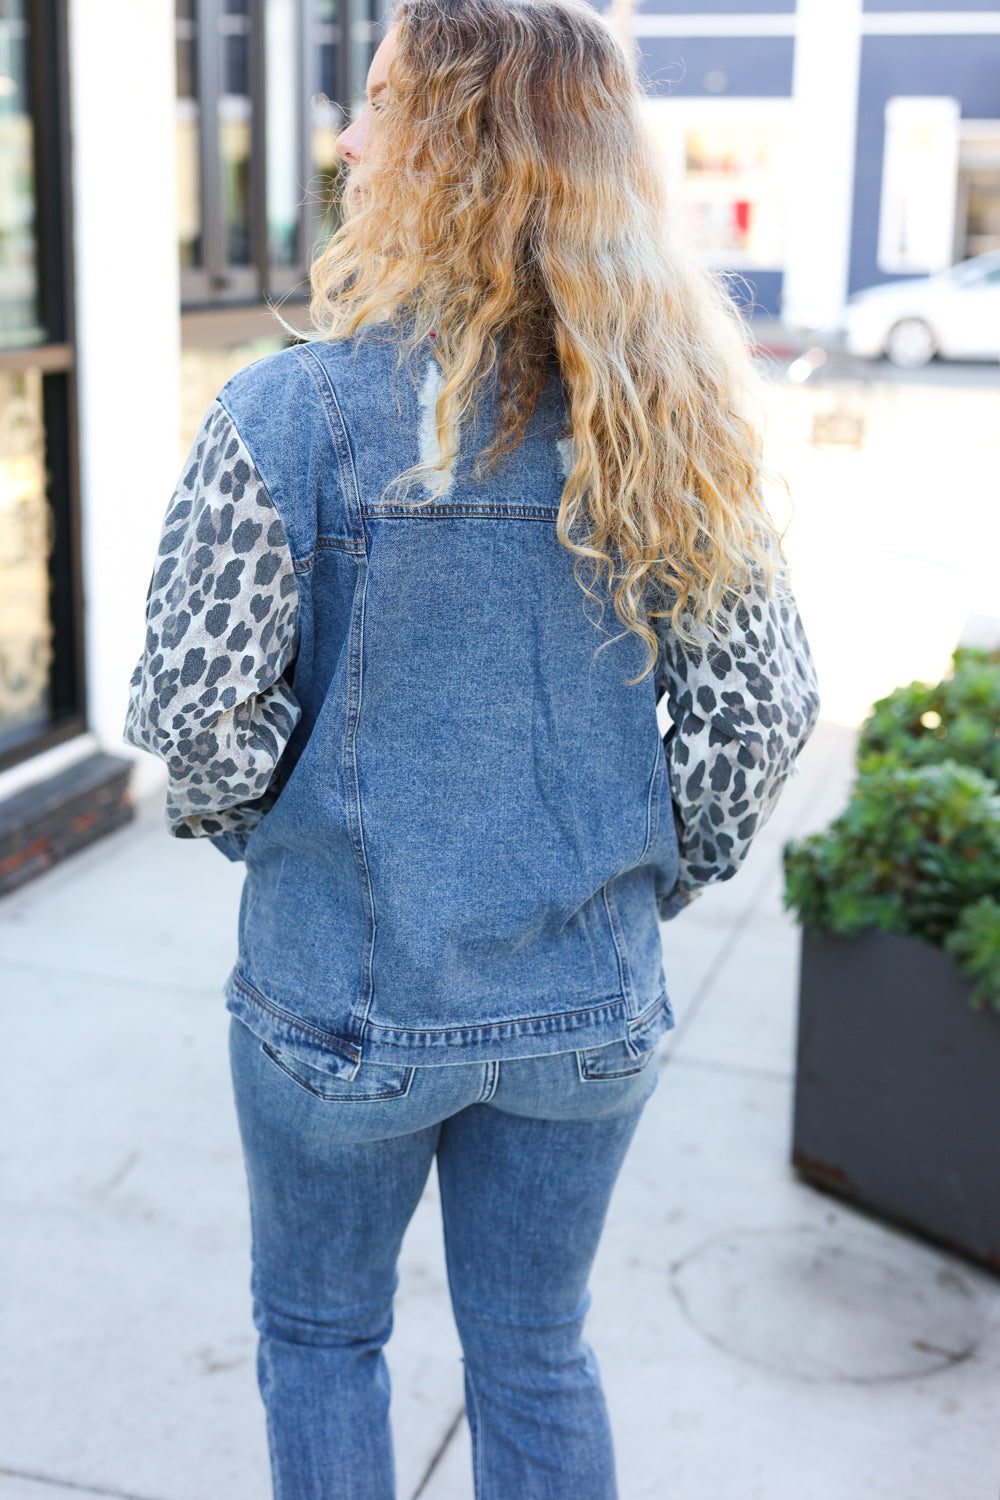 Give It Your All Denim Jacket